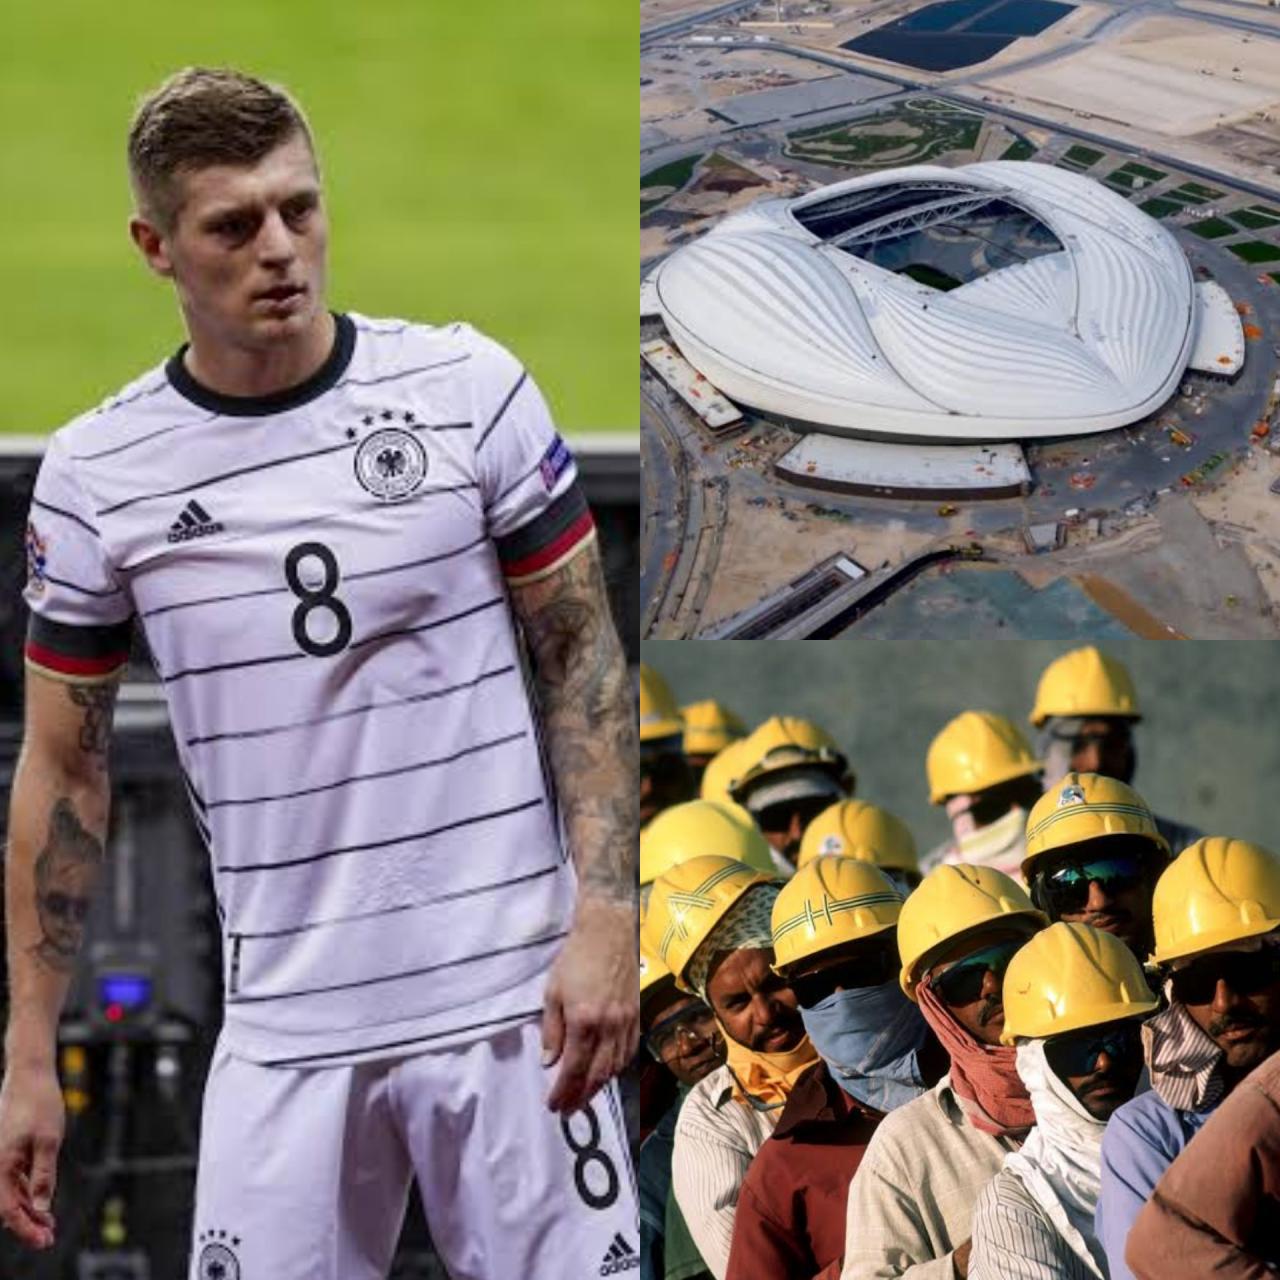 Footballer Toni Kroos reacts to plans by some countries to boycott the Qatar 2022 w/cup as reports allege 6,500 migrant workers have died in the country since 2010